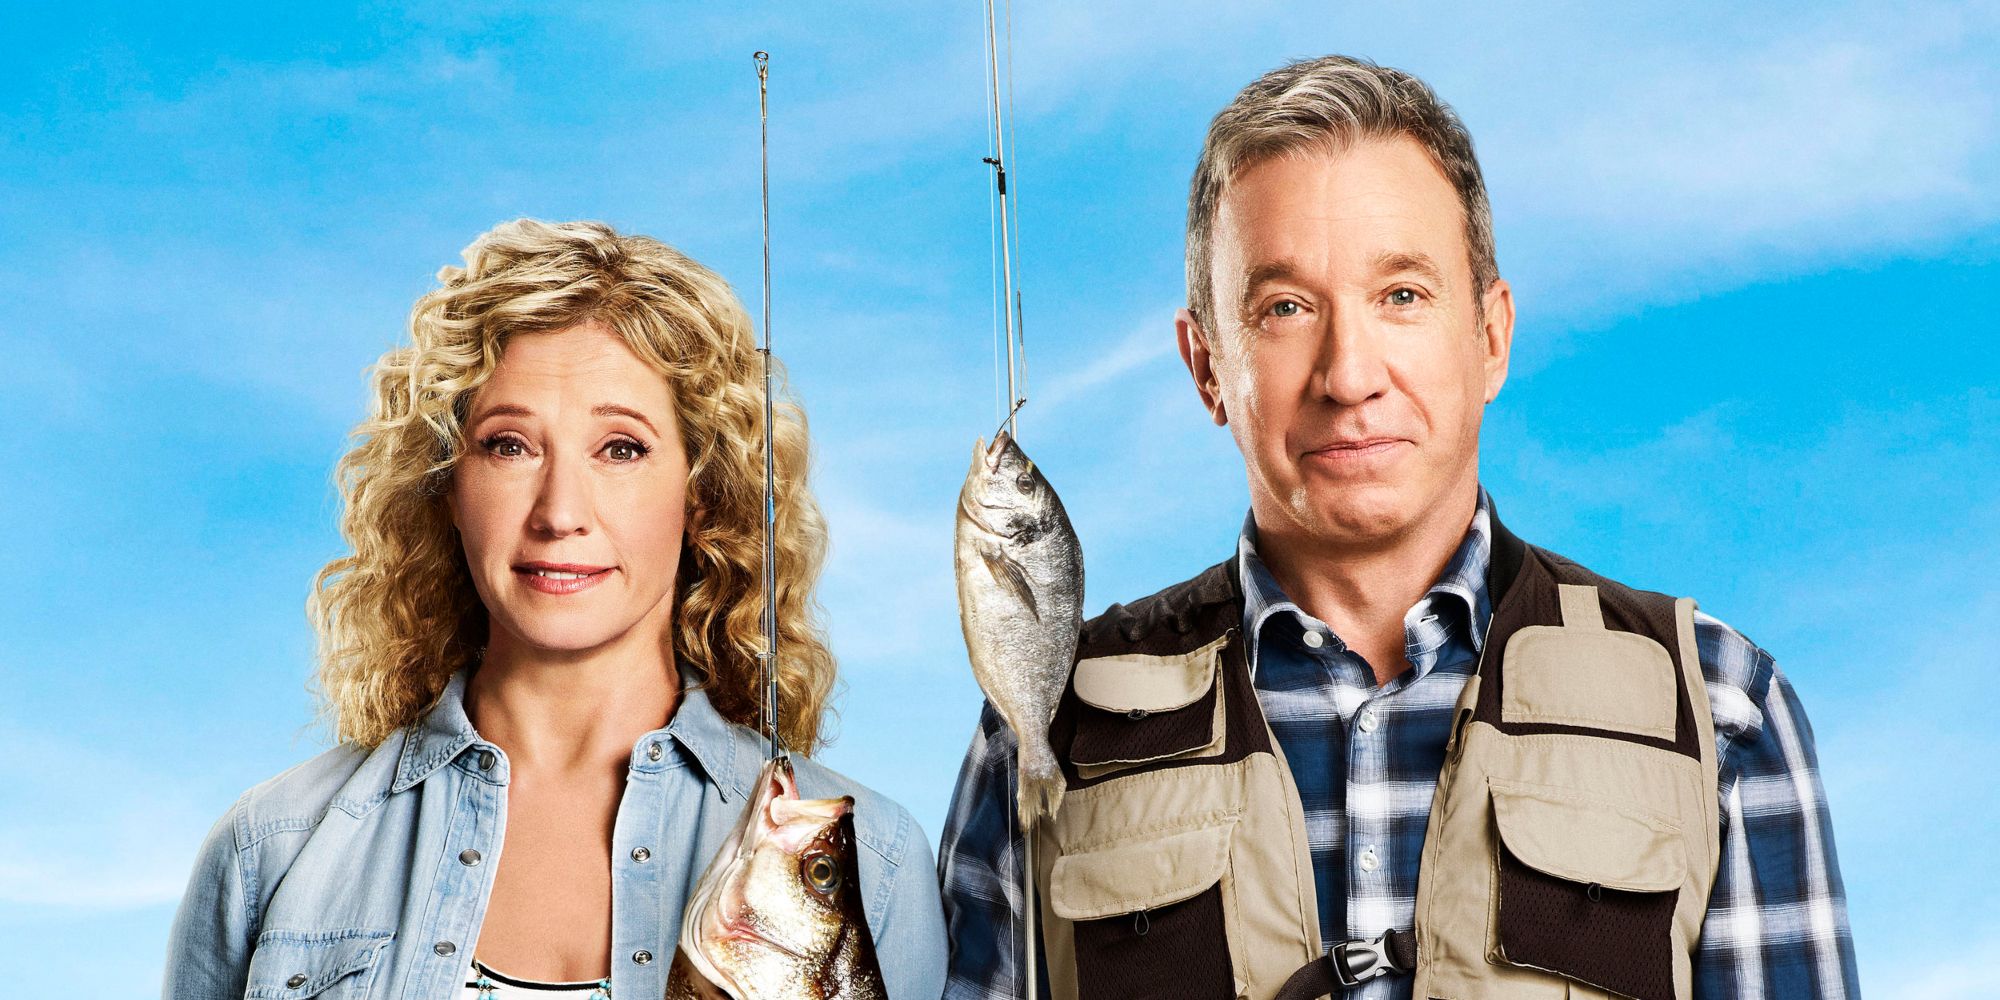 How To Watch Last Man Standing Online (It Is On Netflix Hulu Or Prime)